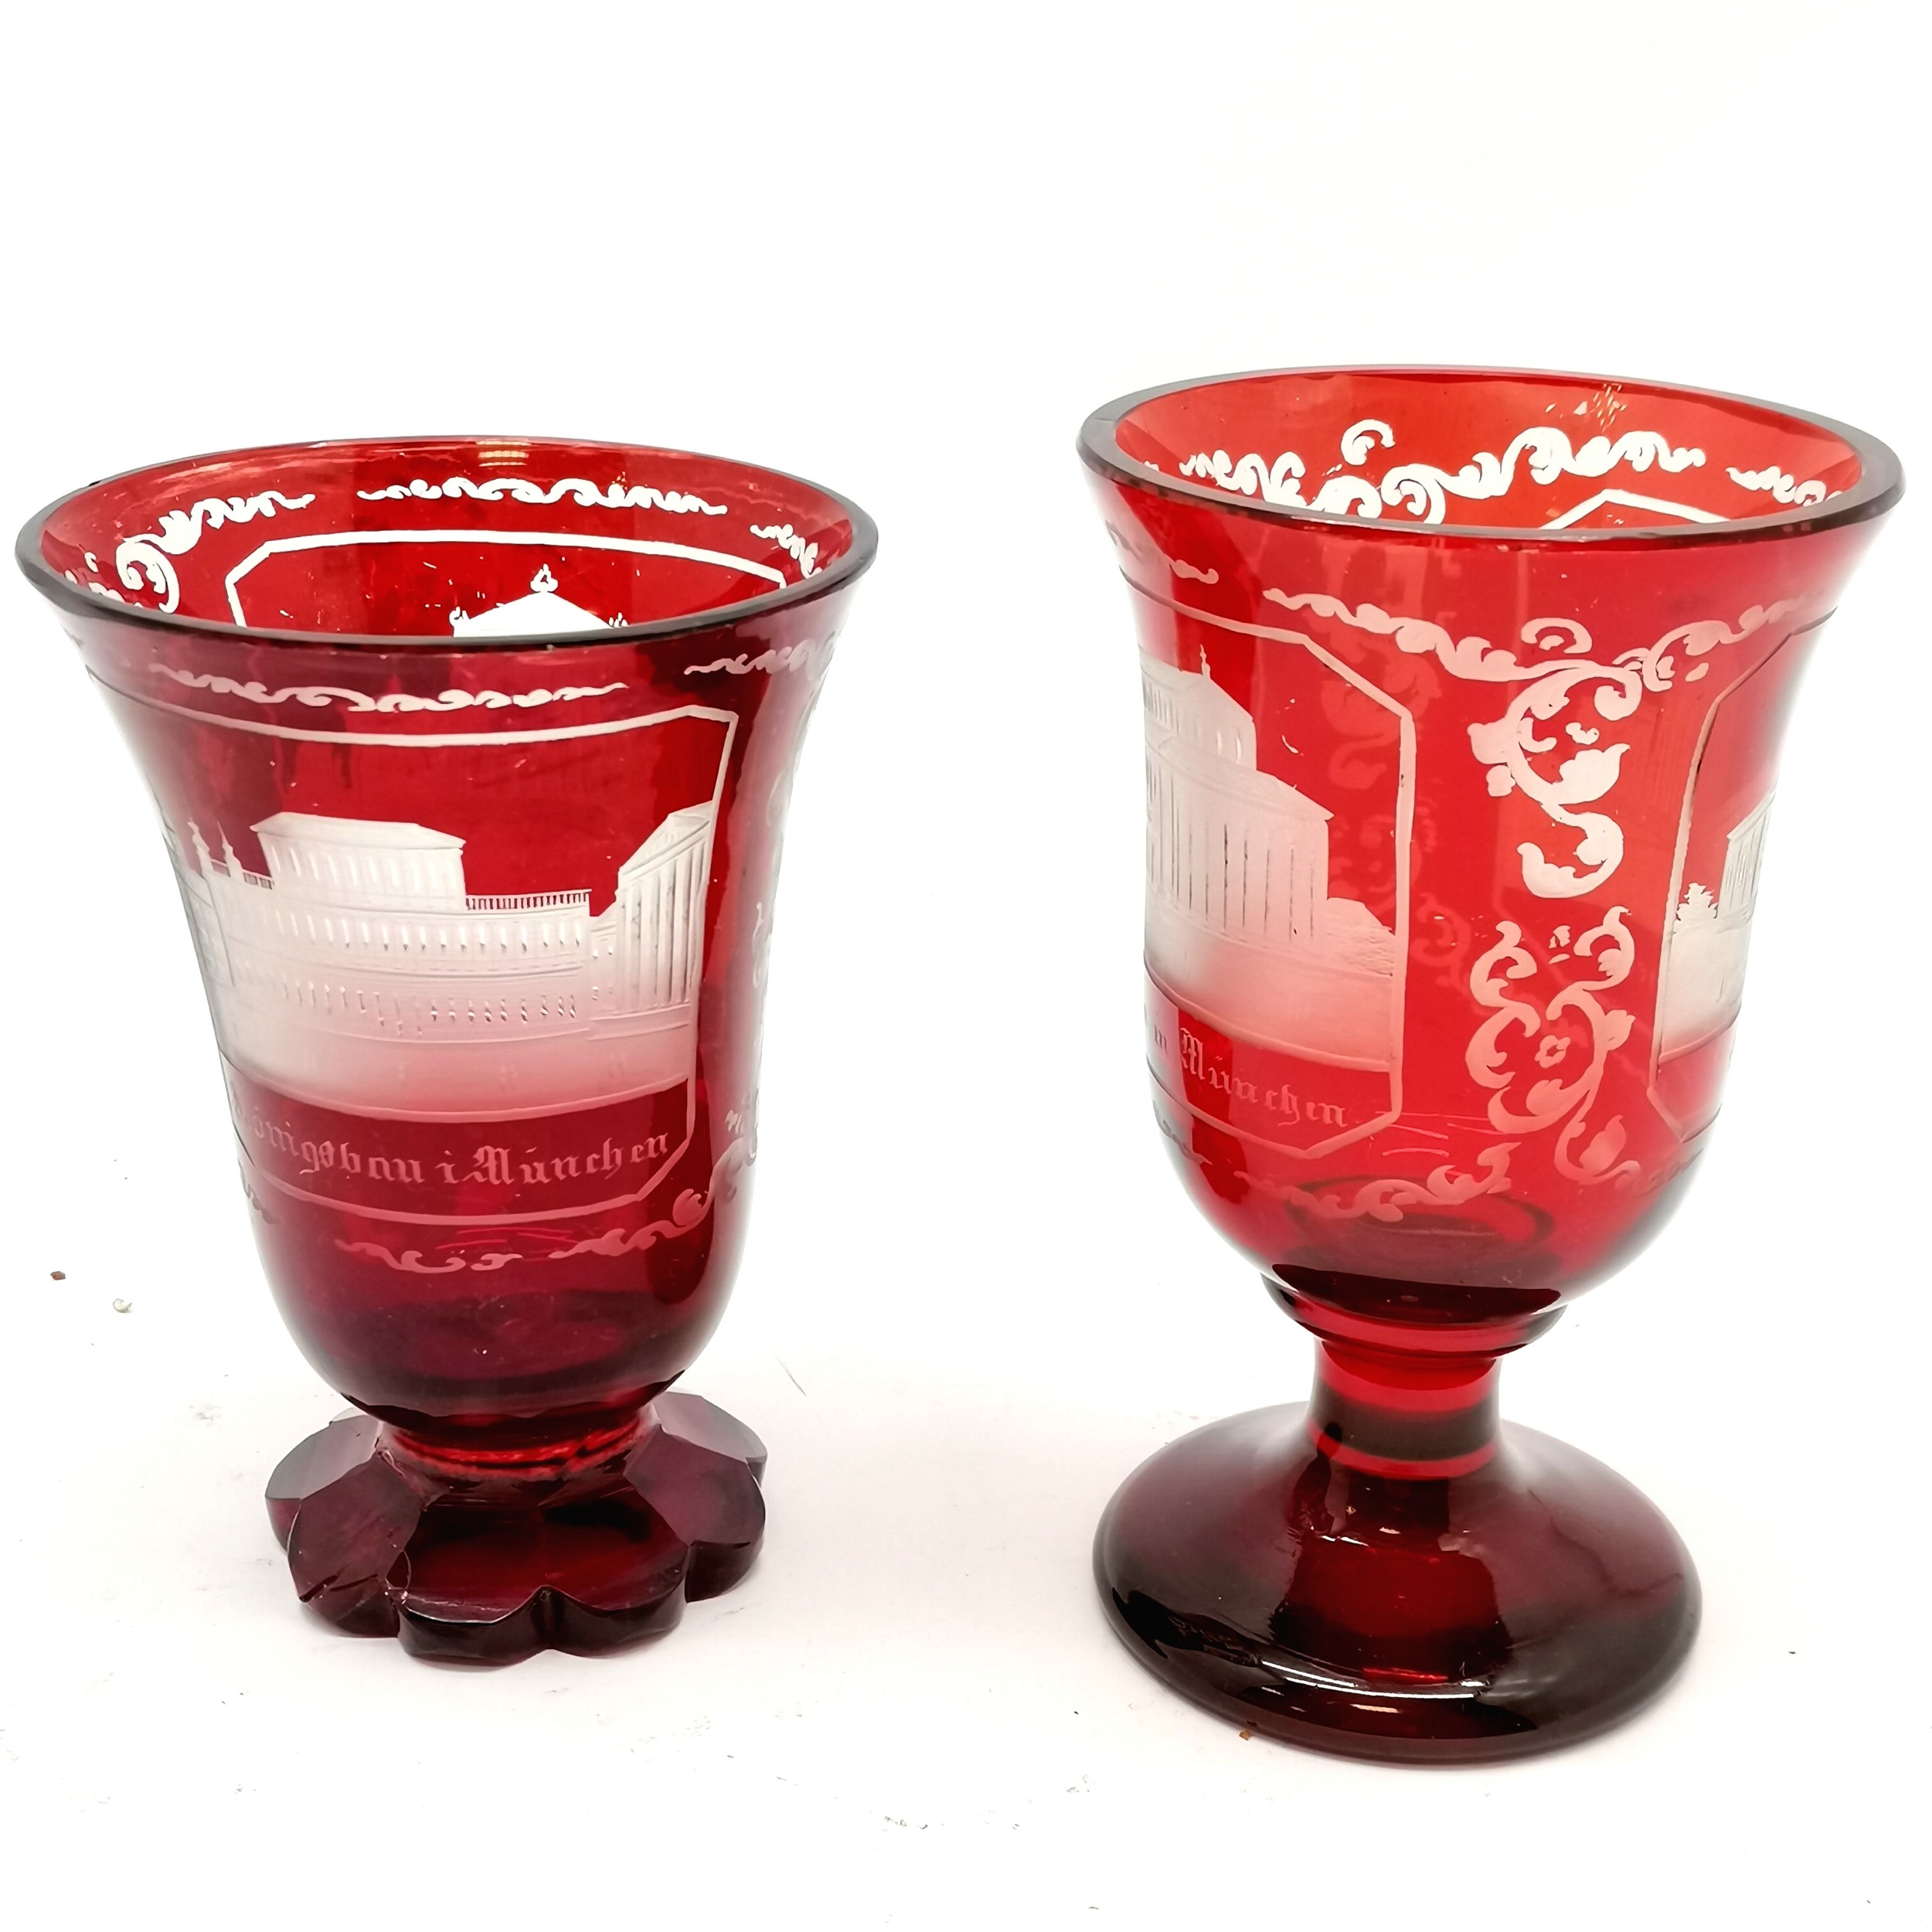 2 x antique ruby glass goblets with acid etched buildings pictured - tallest 13cm ~ both have